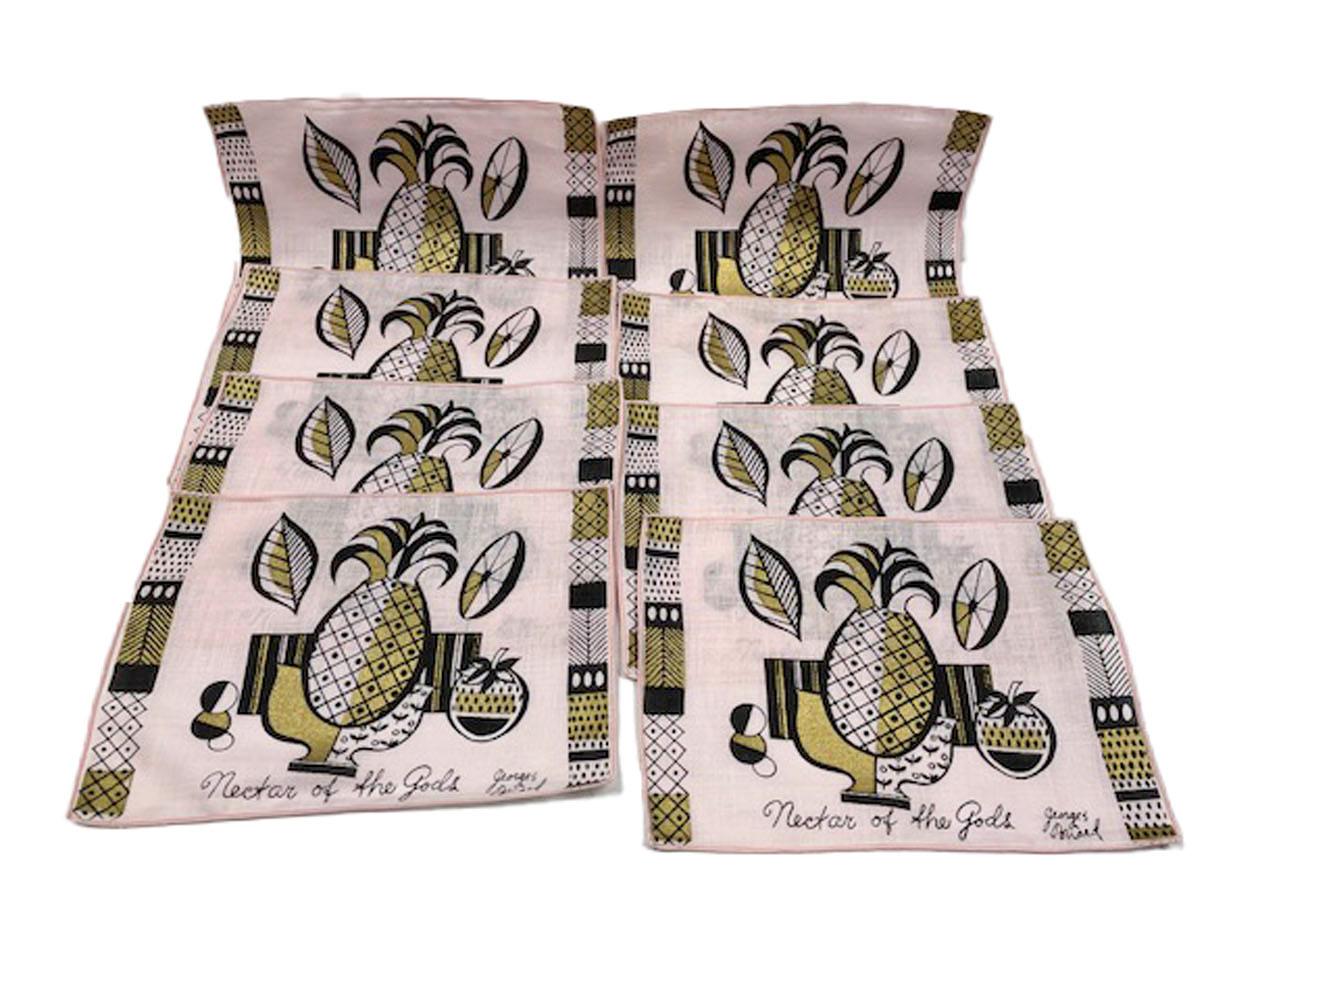 American Vintage Linen Cocktail Napkins by Georges Briard in Nectar of the Gods Pattern For Sale